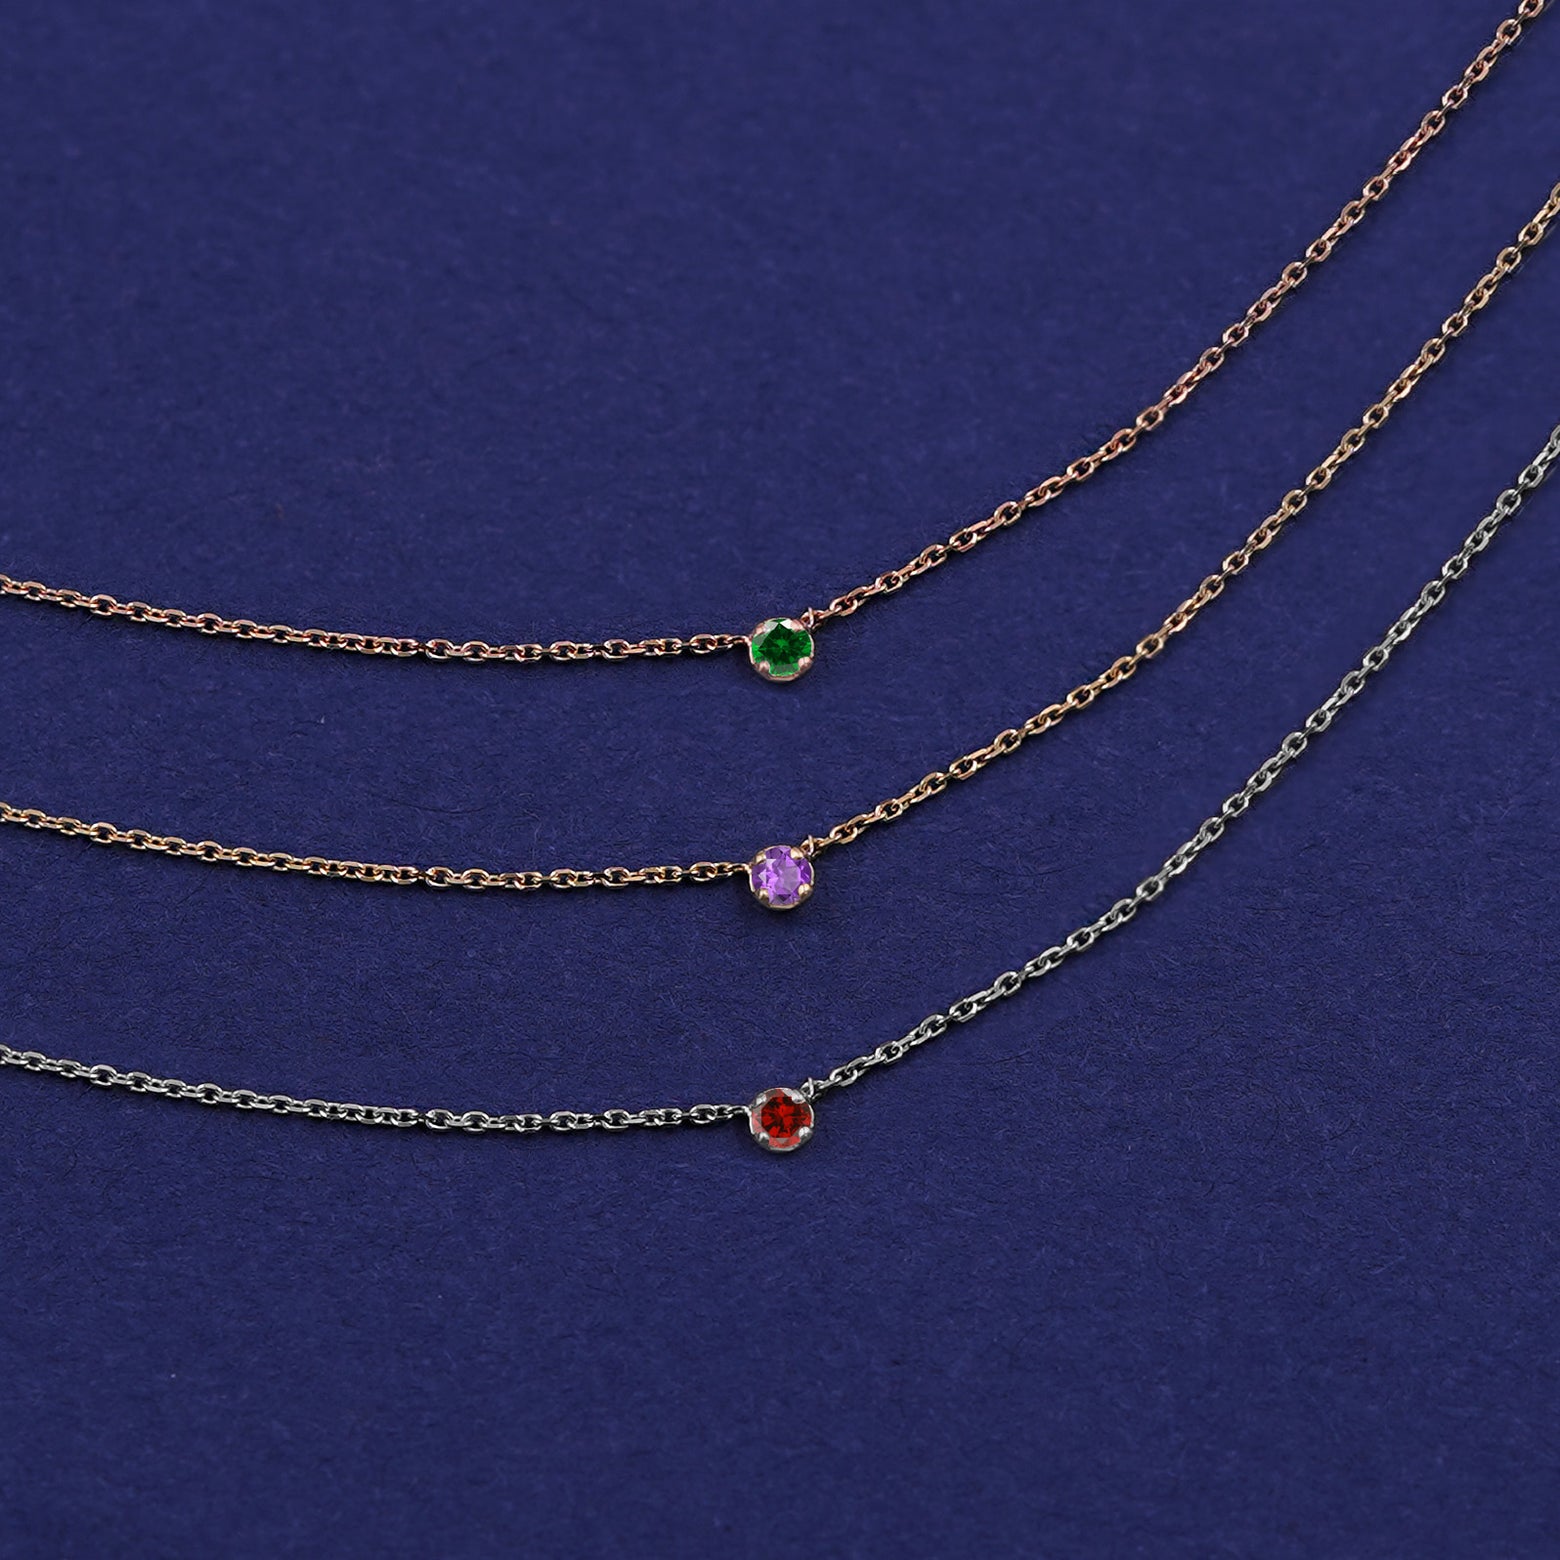 Three Gemstone Cable Necklaces shown in options of rose, yellow, and white gold